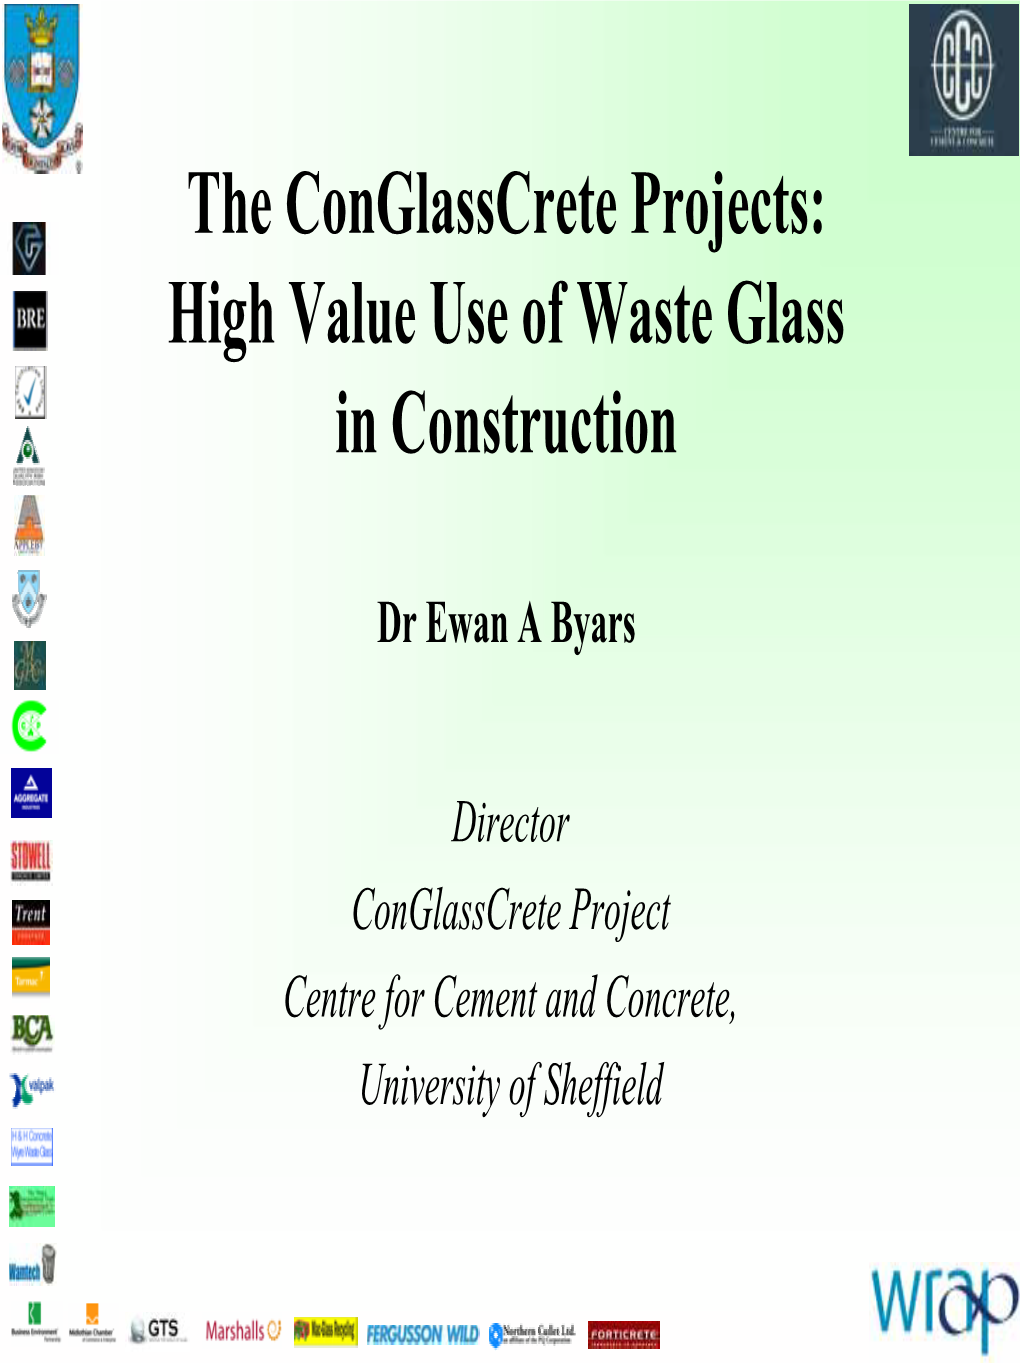 The Conglasscrete Projects: High Value Use of Waste Glass in Construction